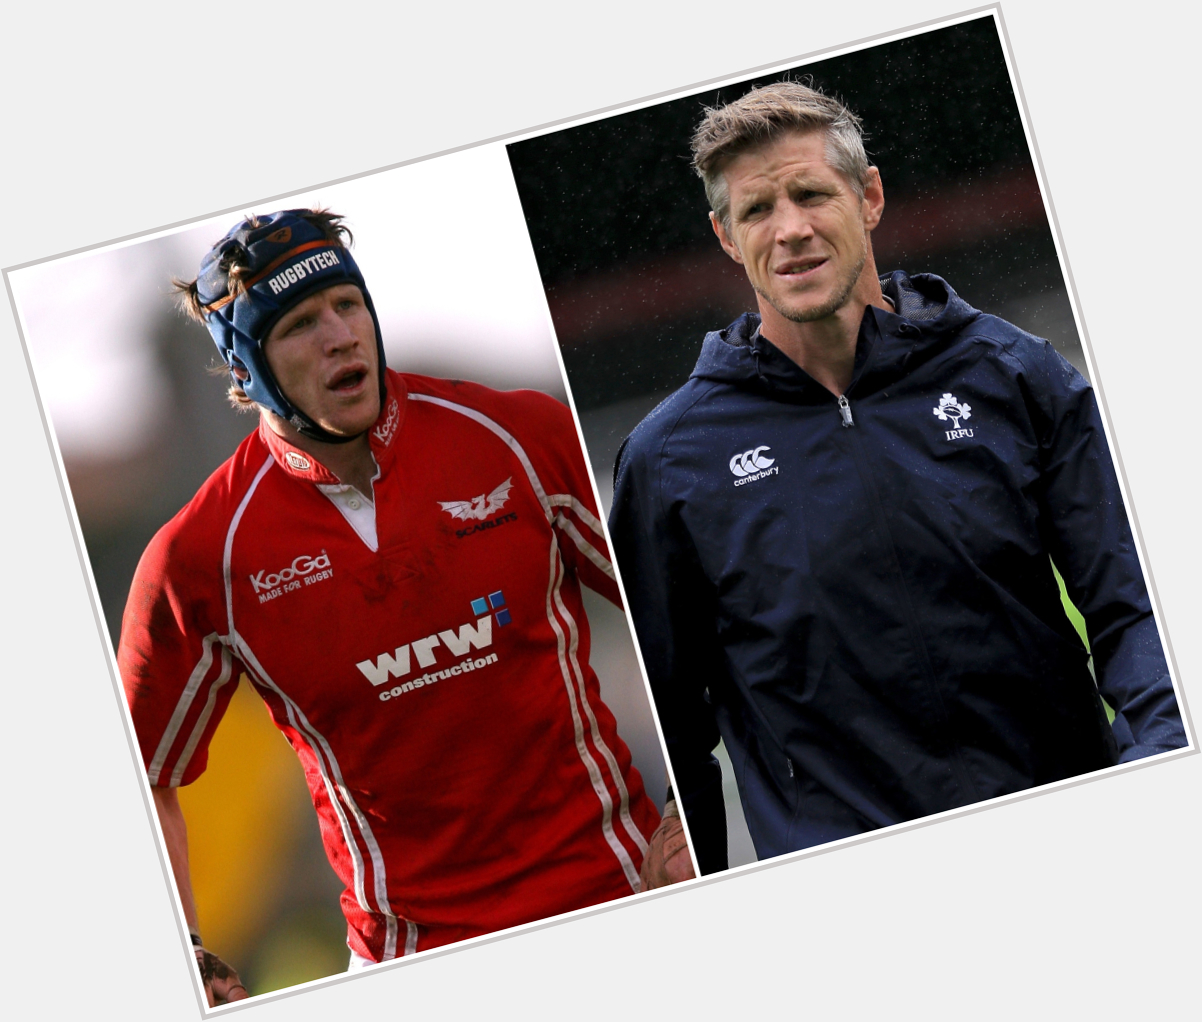  Happy 45th birthday to Scarlets and Ireland legend Simon Easterby! 